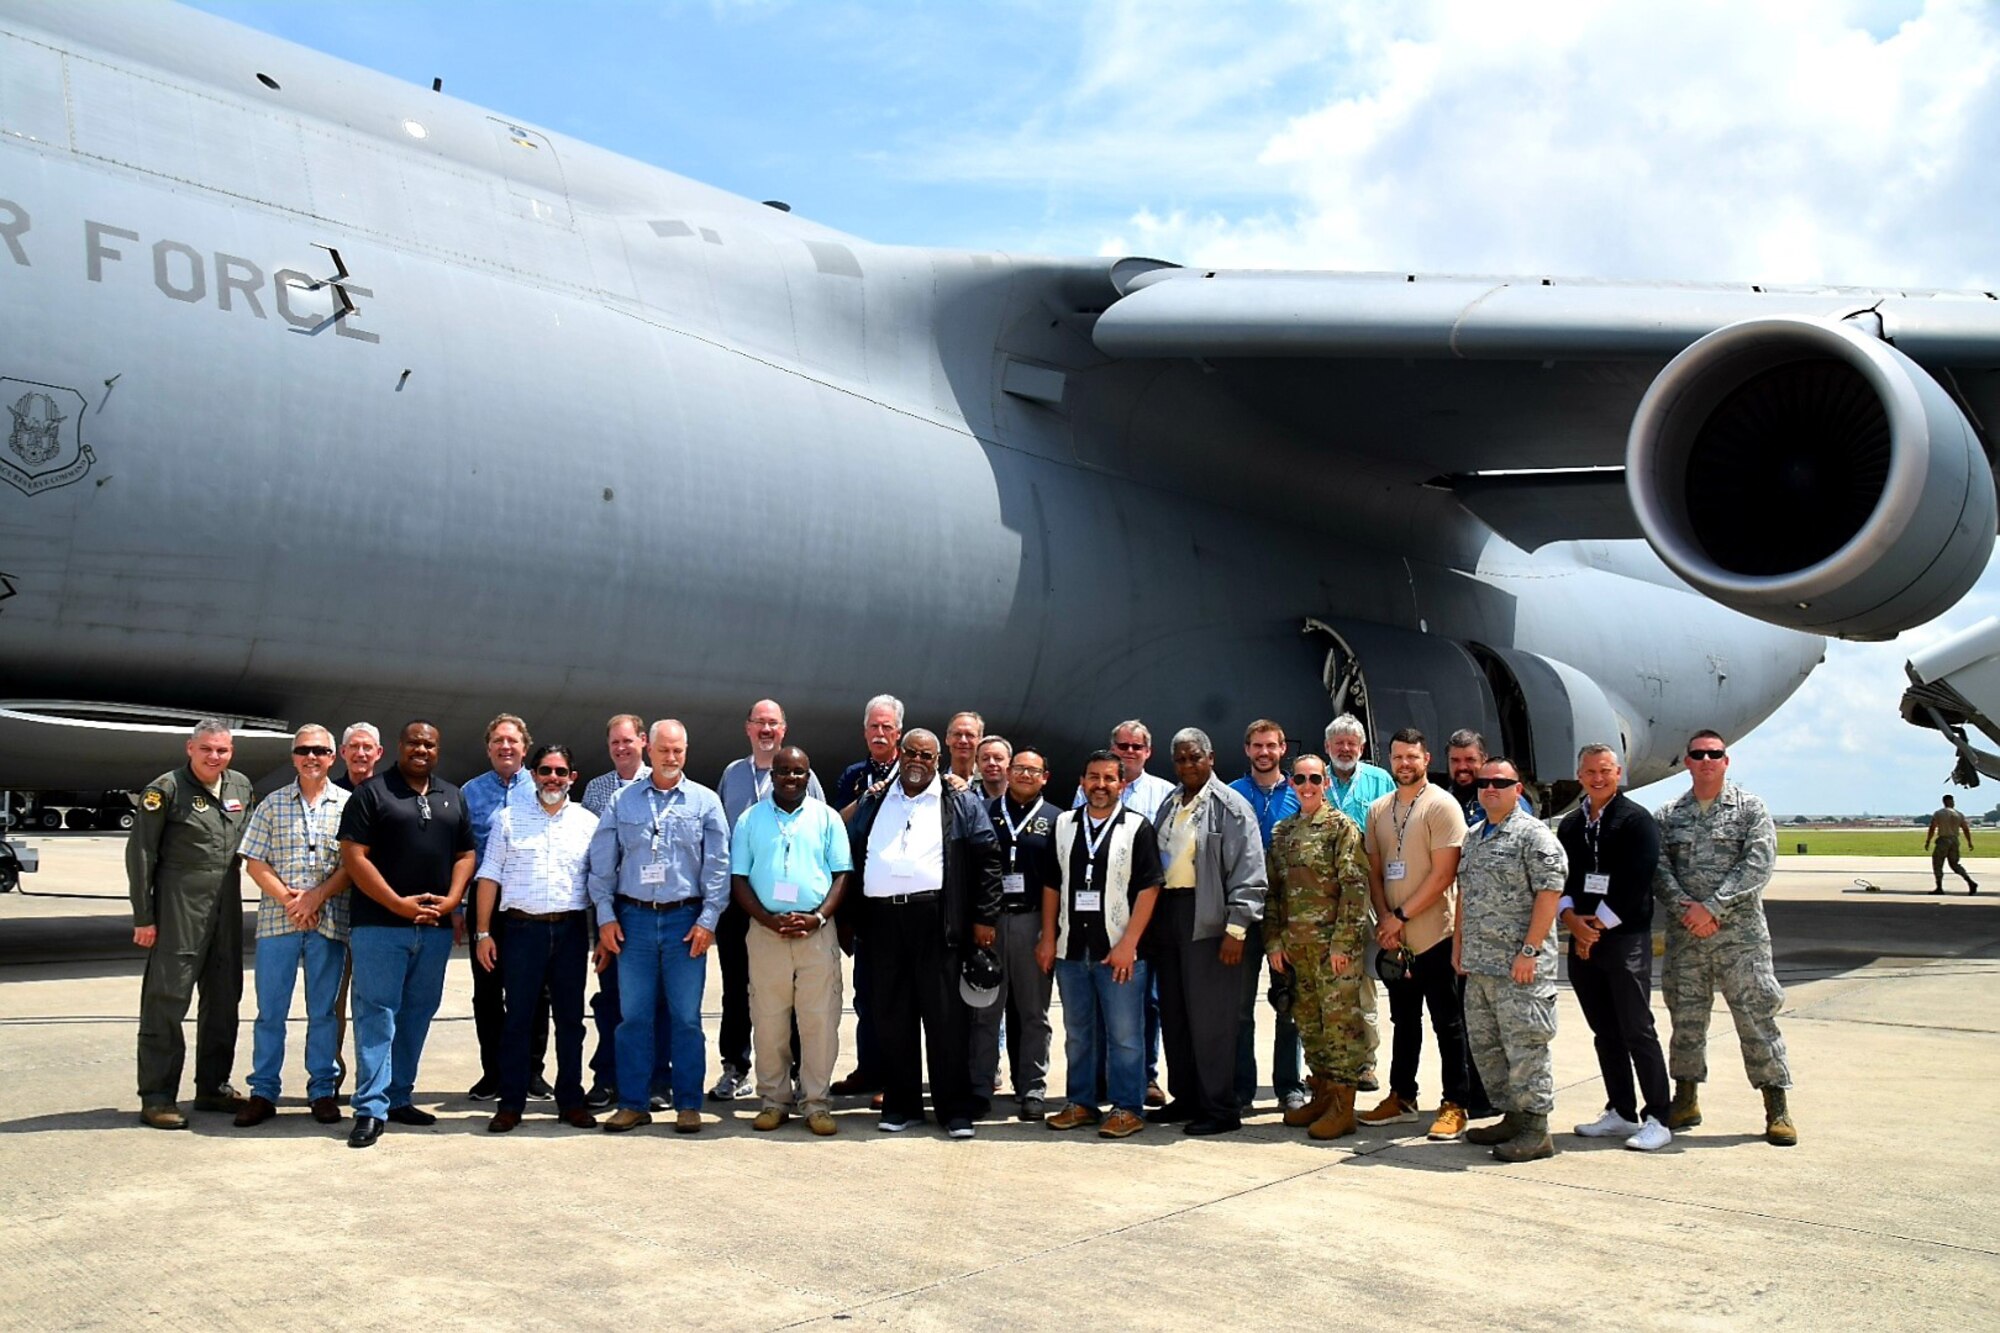 Civilian clergy and their military sponsors pose for a photo in front after a flight on a C-5M Super Galaxy at the 433rd Airlift Wing’s annual Clergy Day flight June 1, 2019, at Joint Base San Antonio-Lackland, Texas.